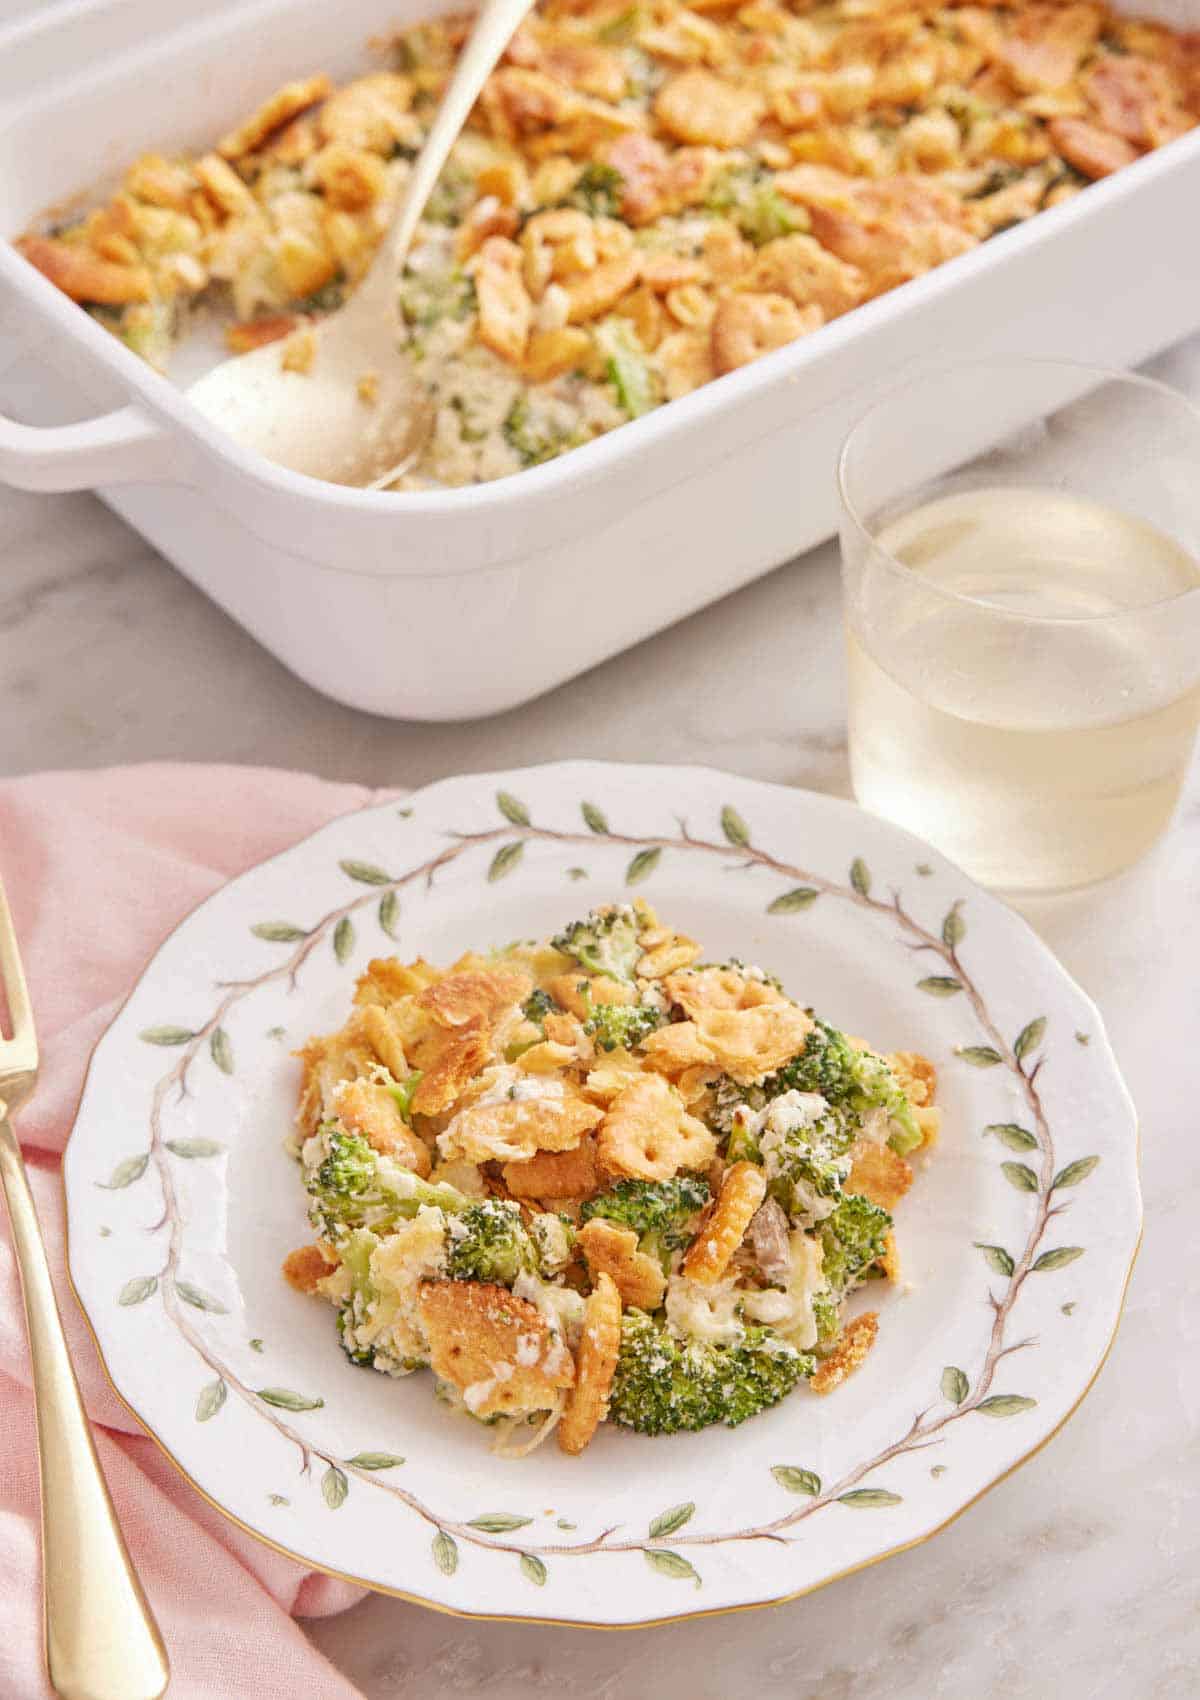 A plate with a serving of broccoli casserole with a glass of wine and baking dish in the background.